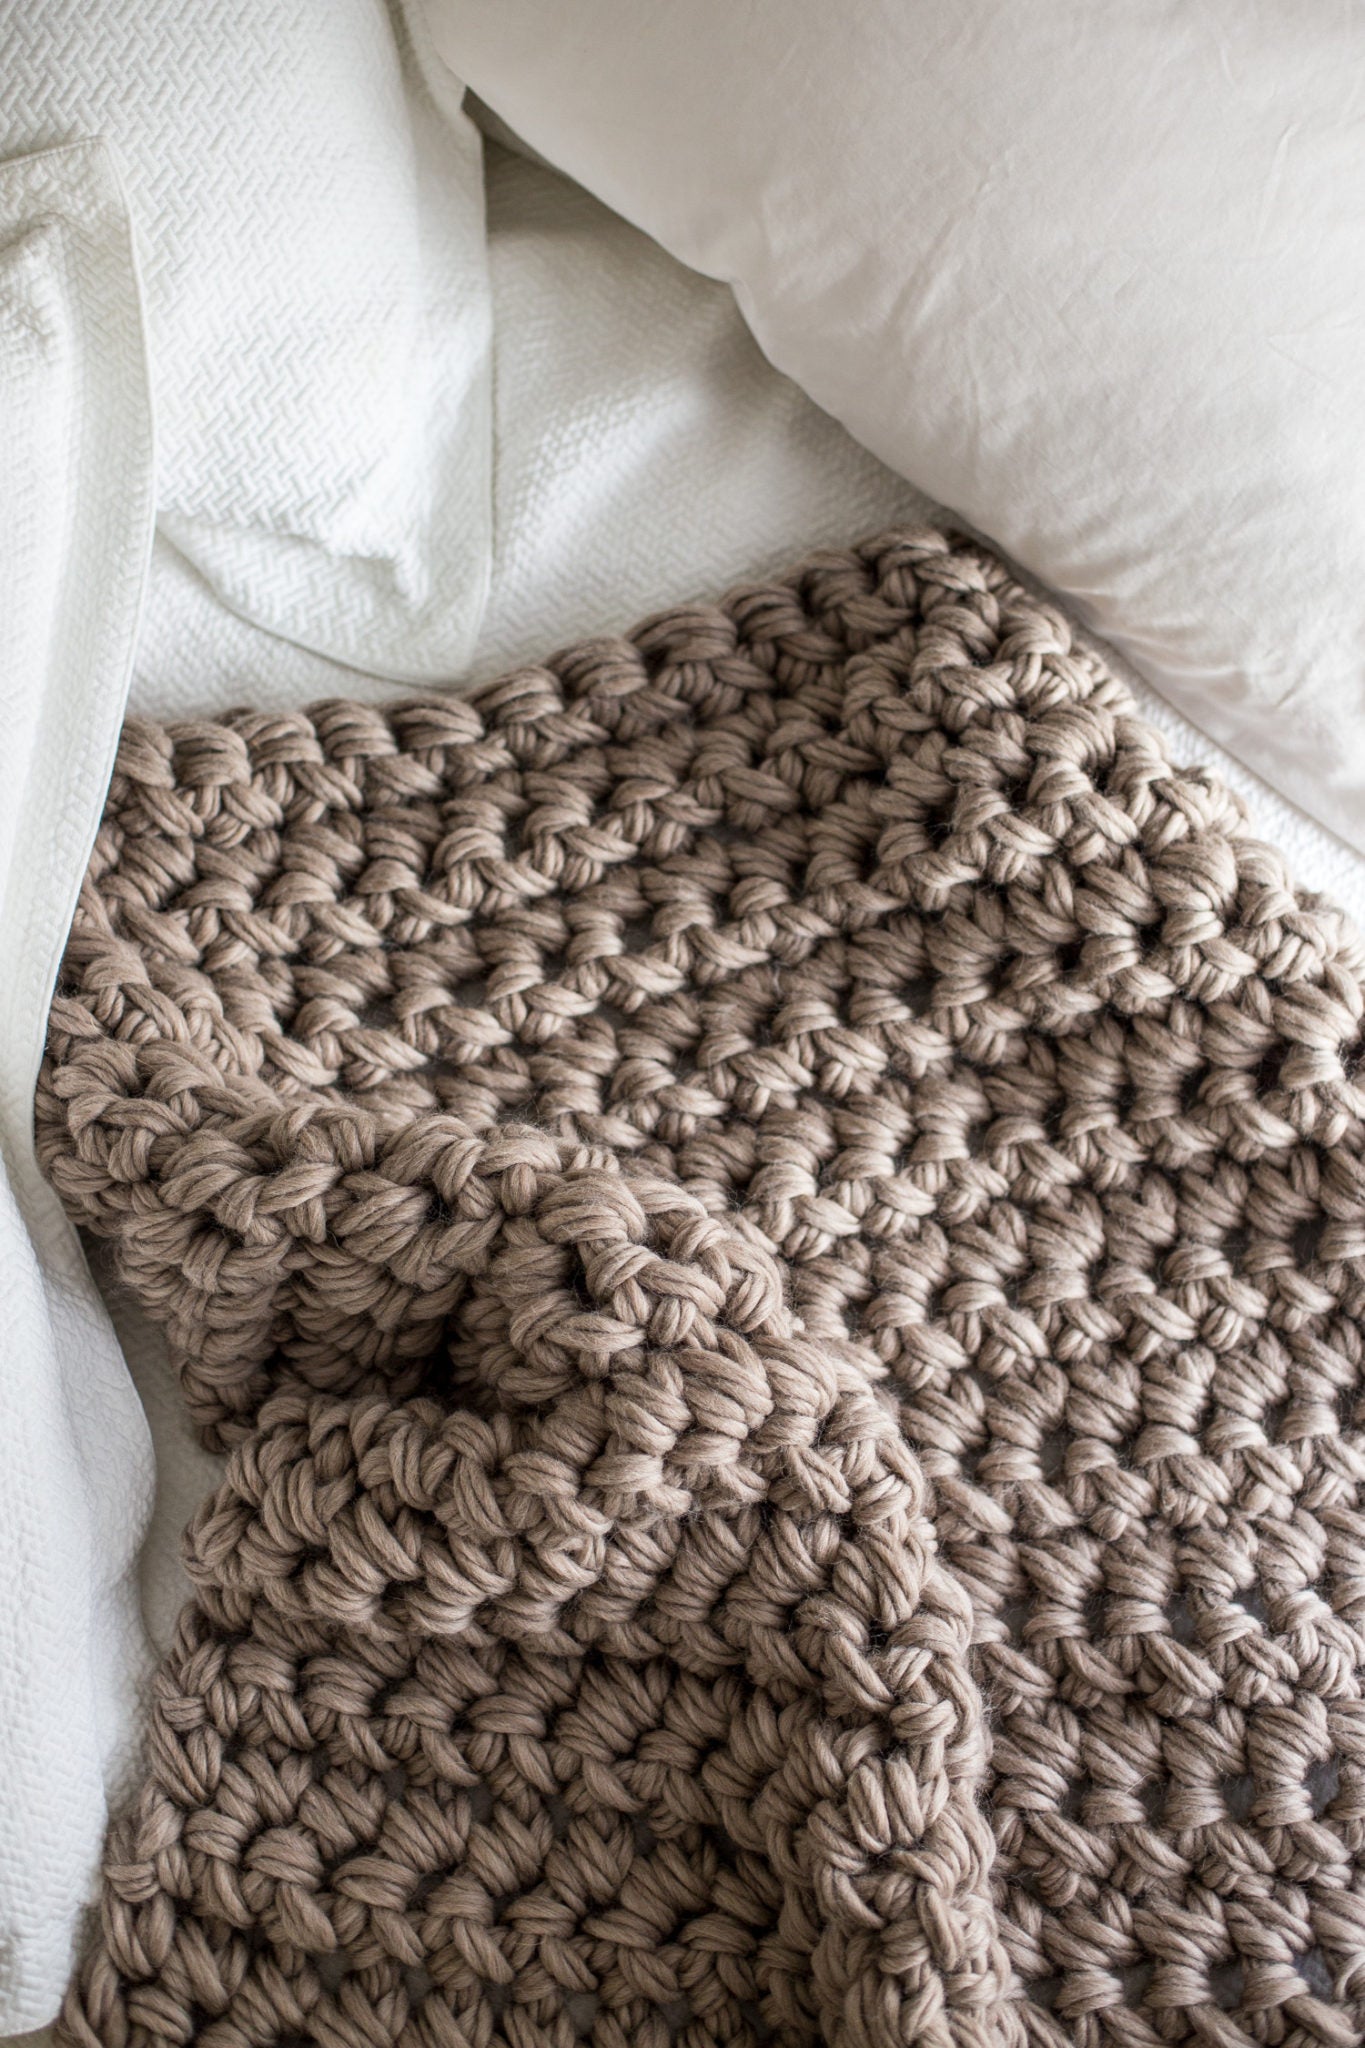 How to Finger Crochet with Thin Yarn, Including Pattern